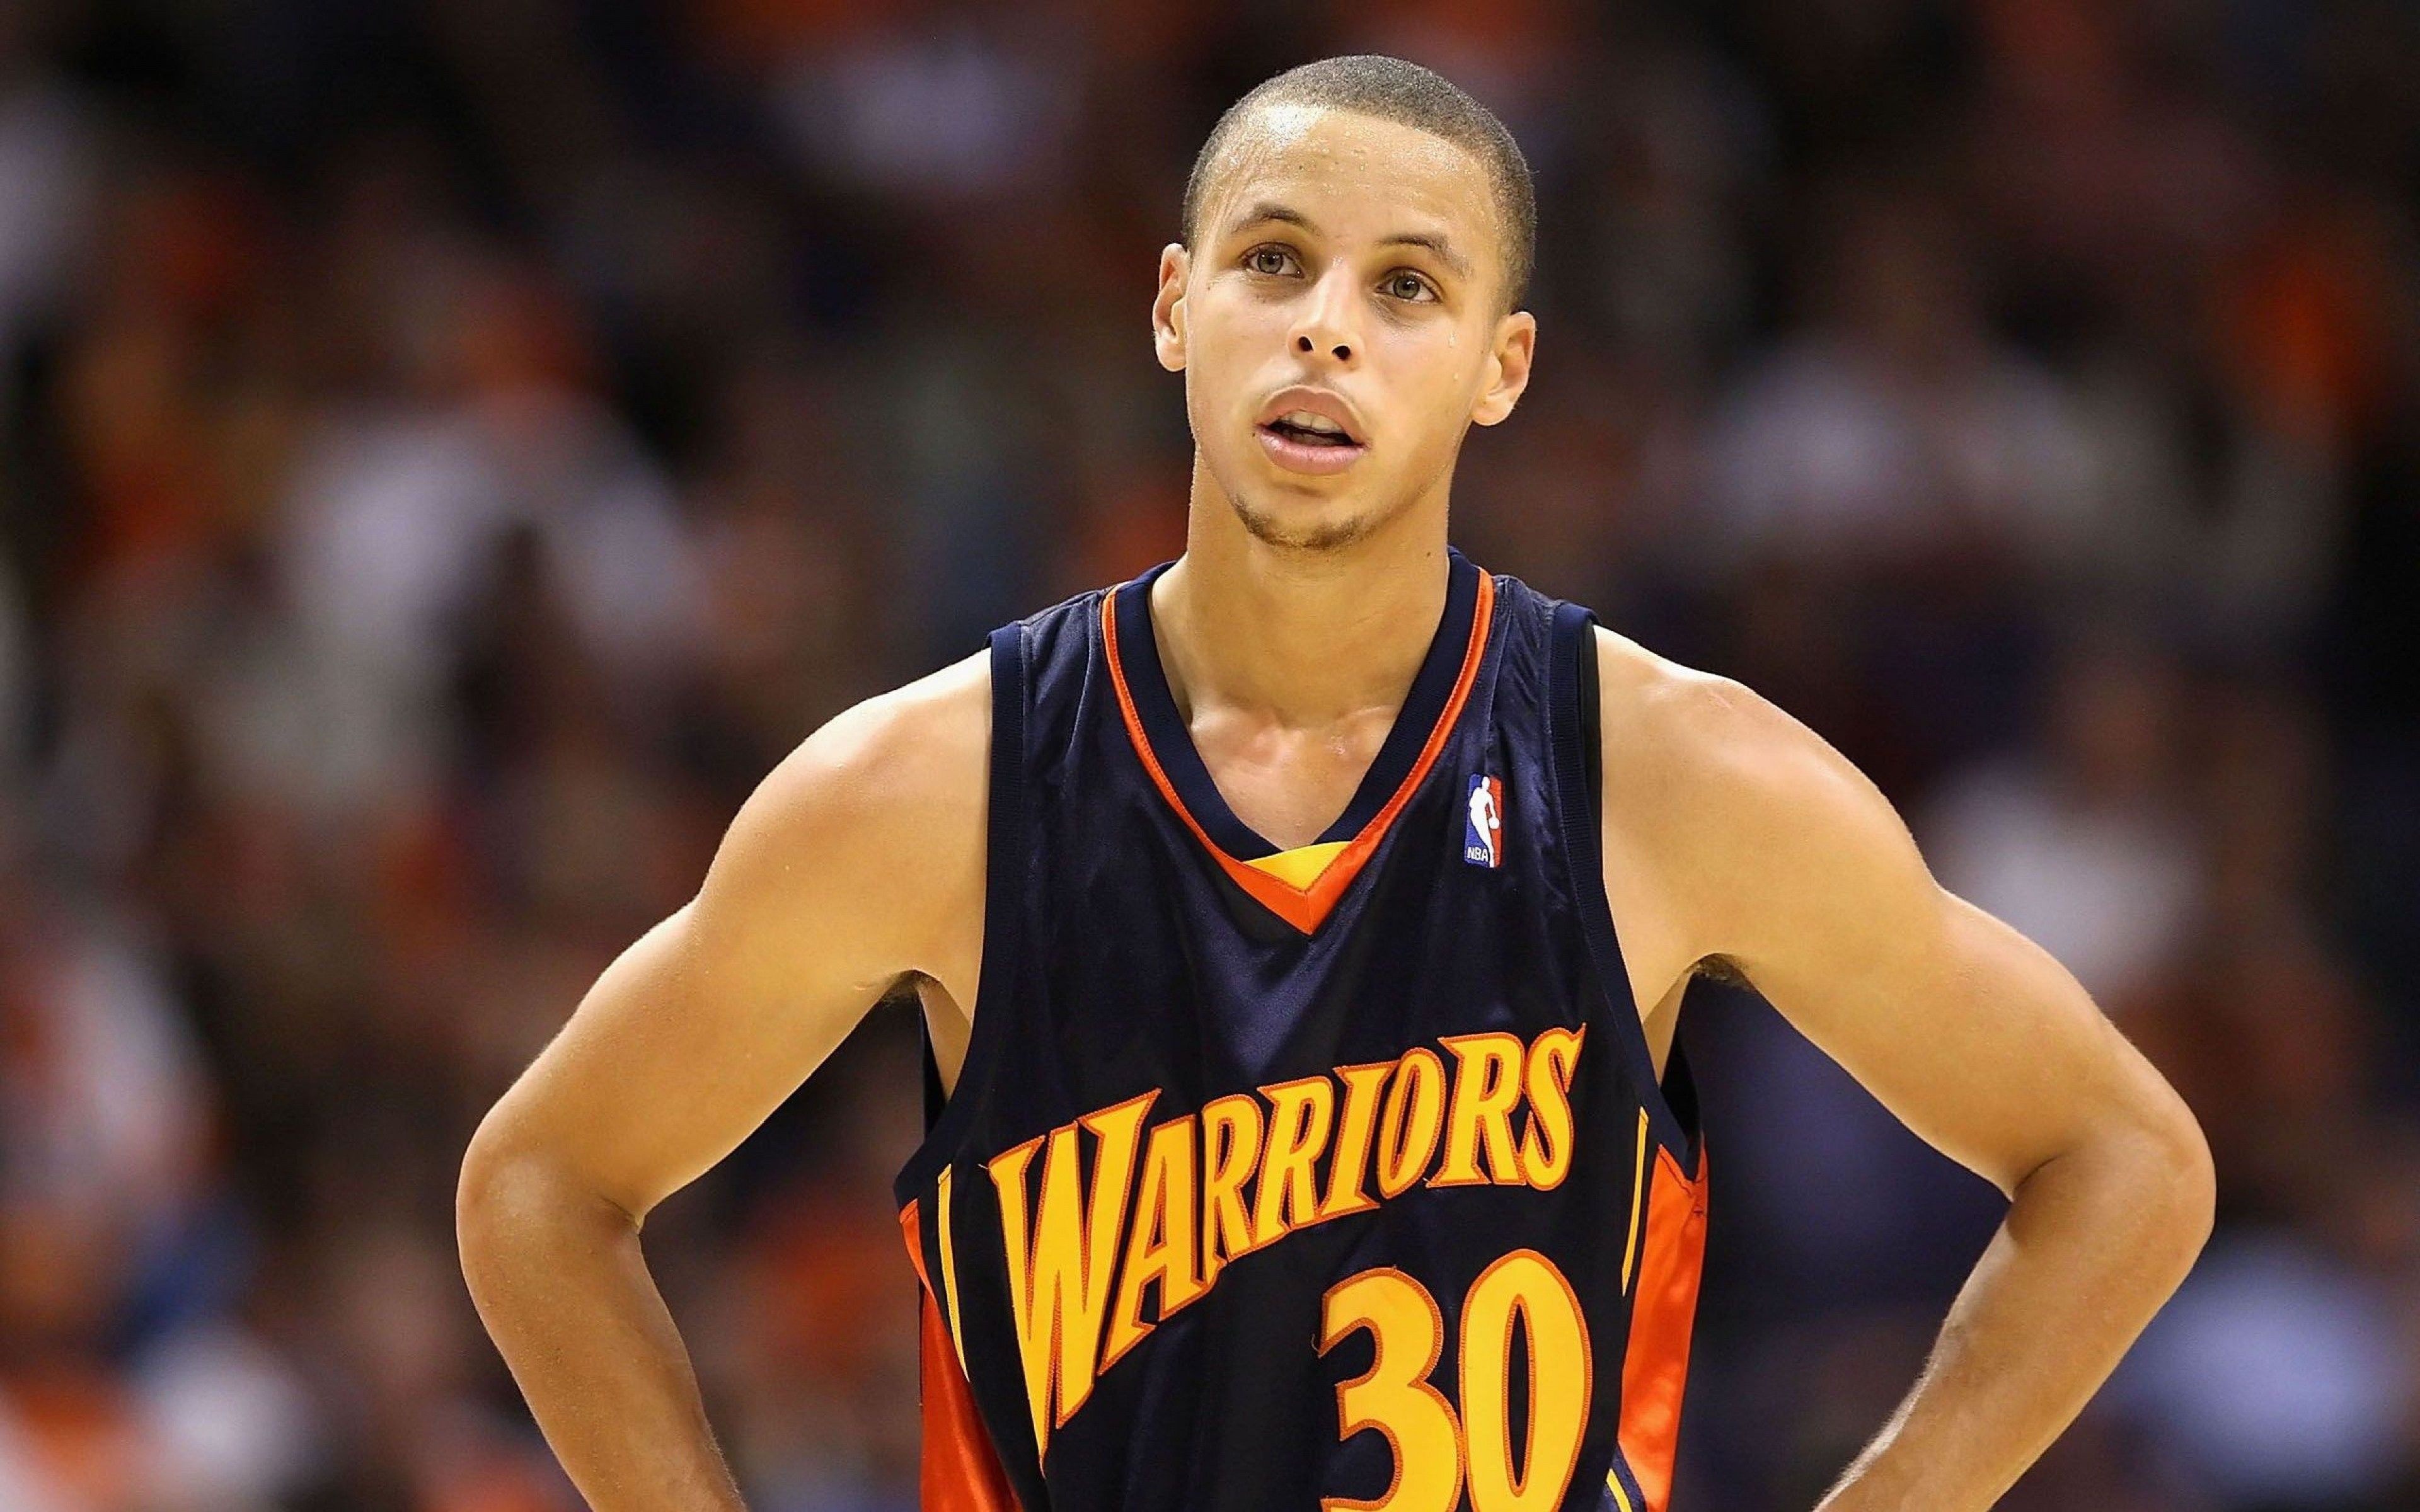 Free download Stephen Curry Basketball Player 2015 Wallpaper New